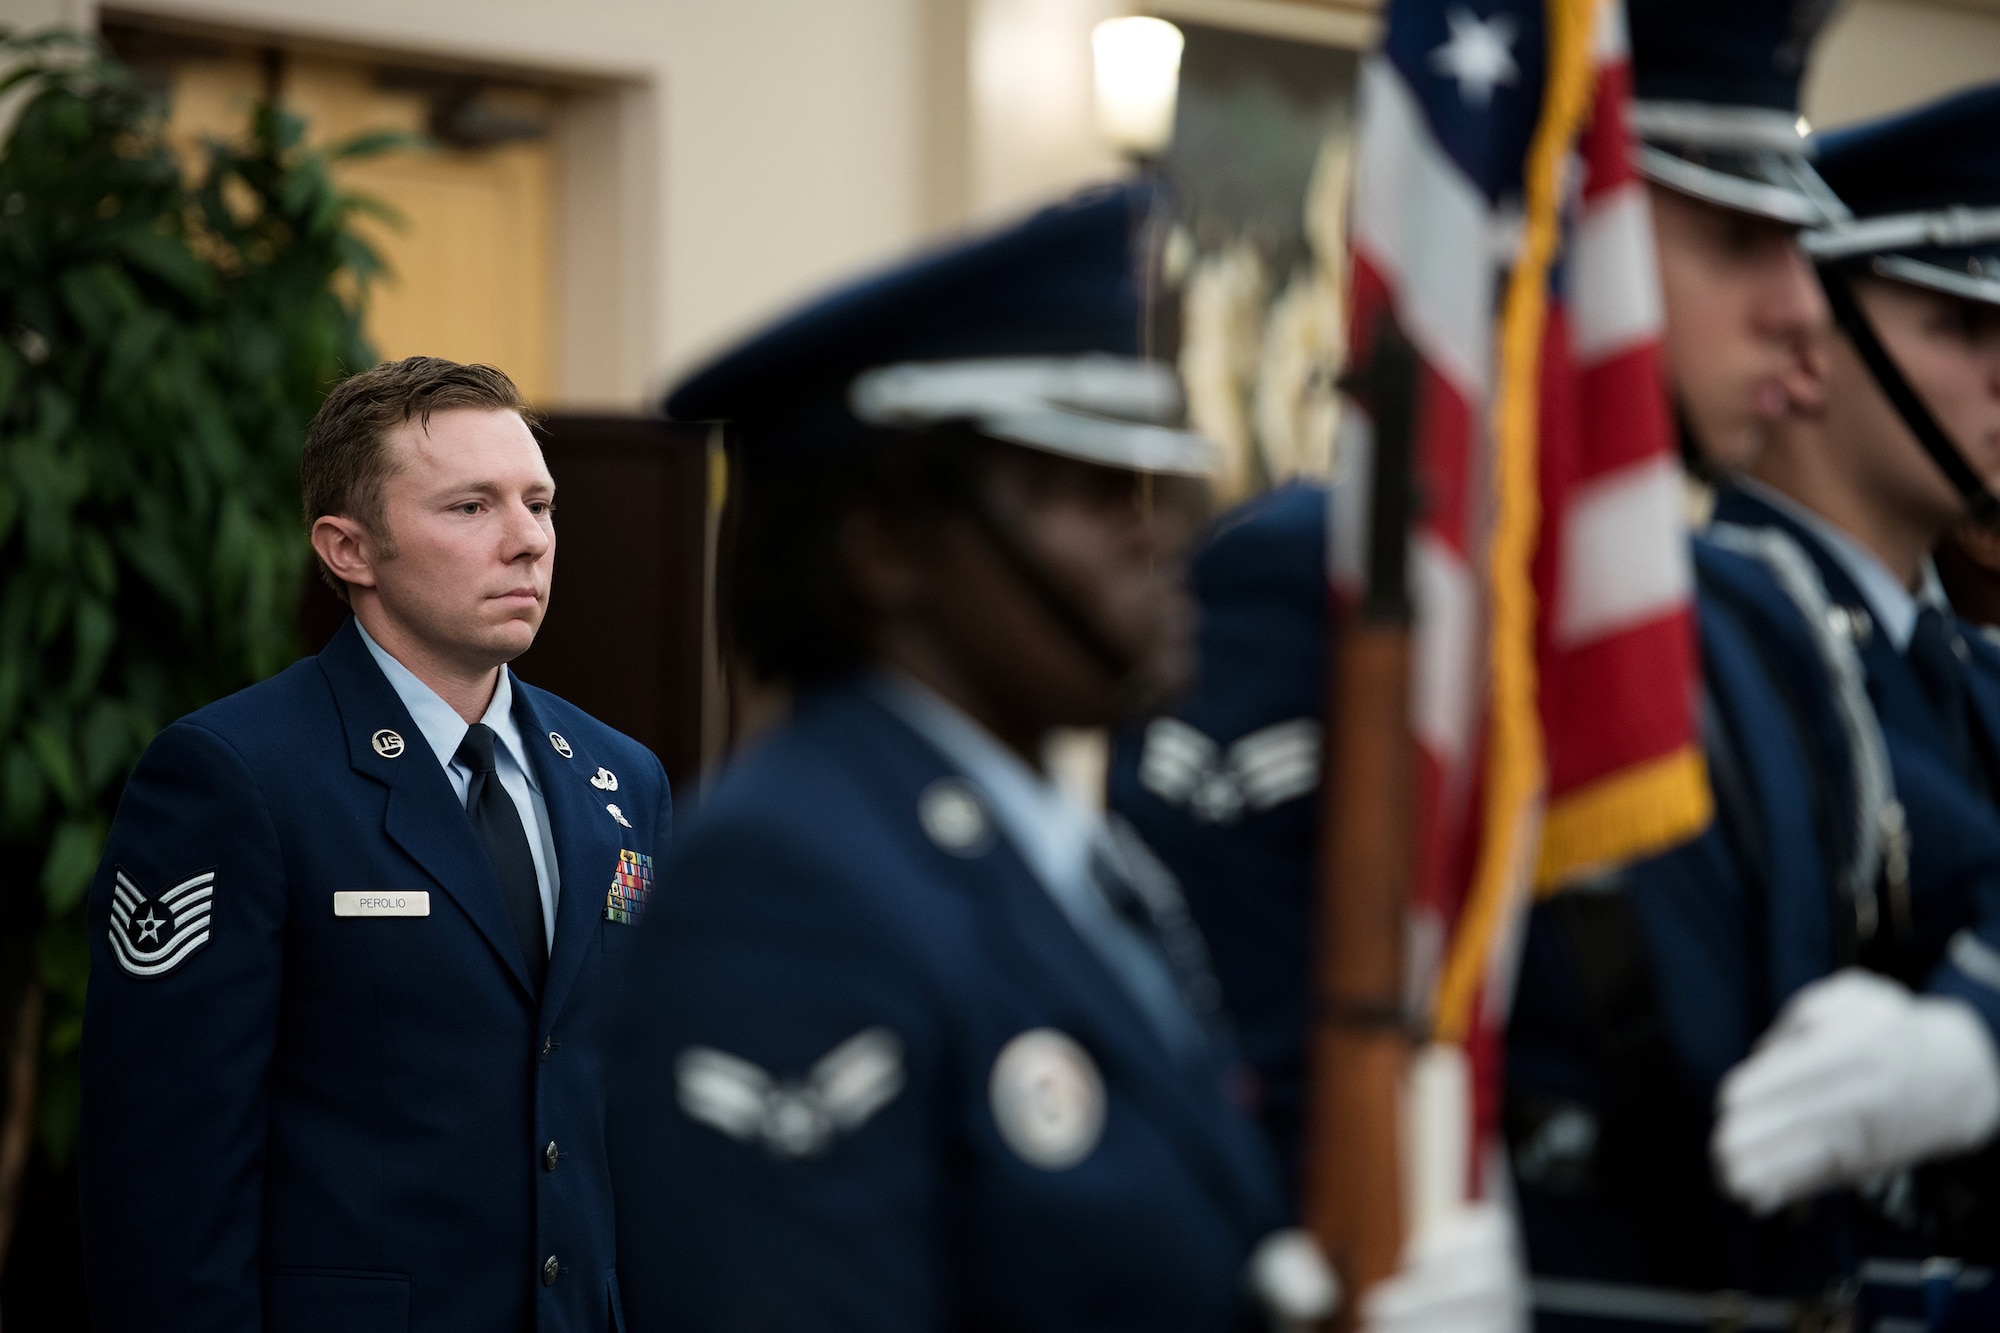 Technical Sgt. Michael Perolio was awarded the Silver Star medal at Joint Base San Antonio-Lackland on July 18.